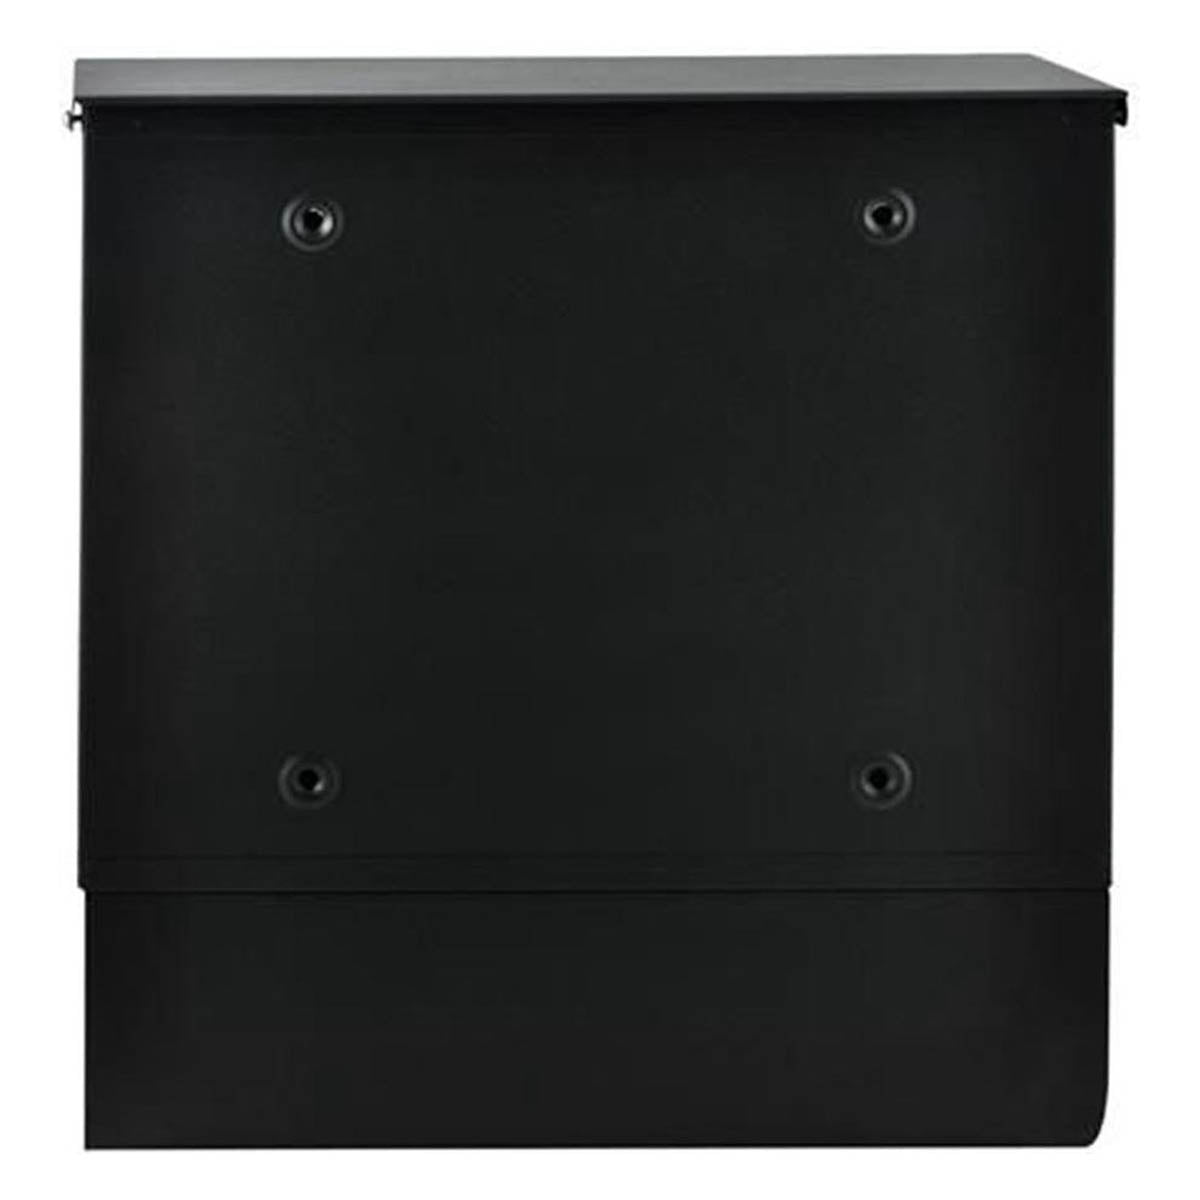 <tc>Ariko</tc> wall letterbox - stainless steel - anthracite black - with newspaper roll - matte black - up to 8 newspapers